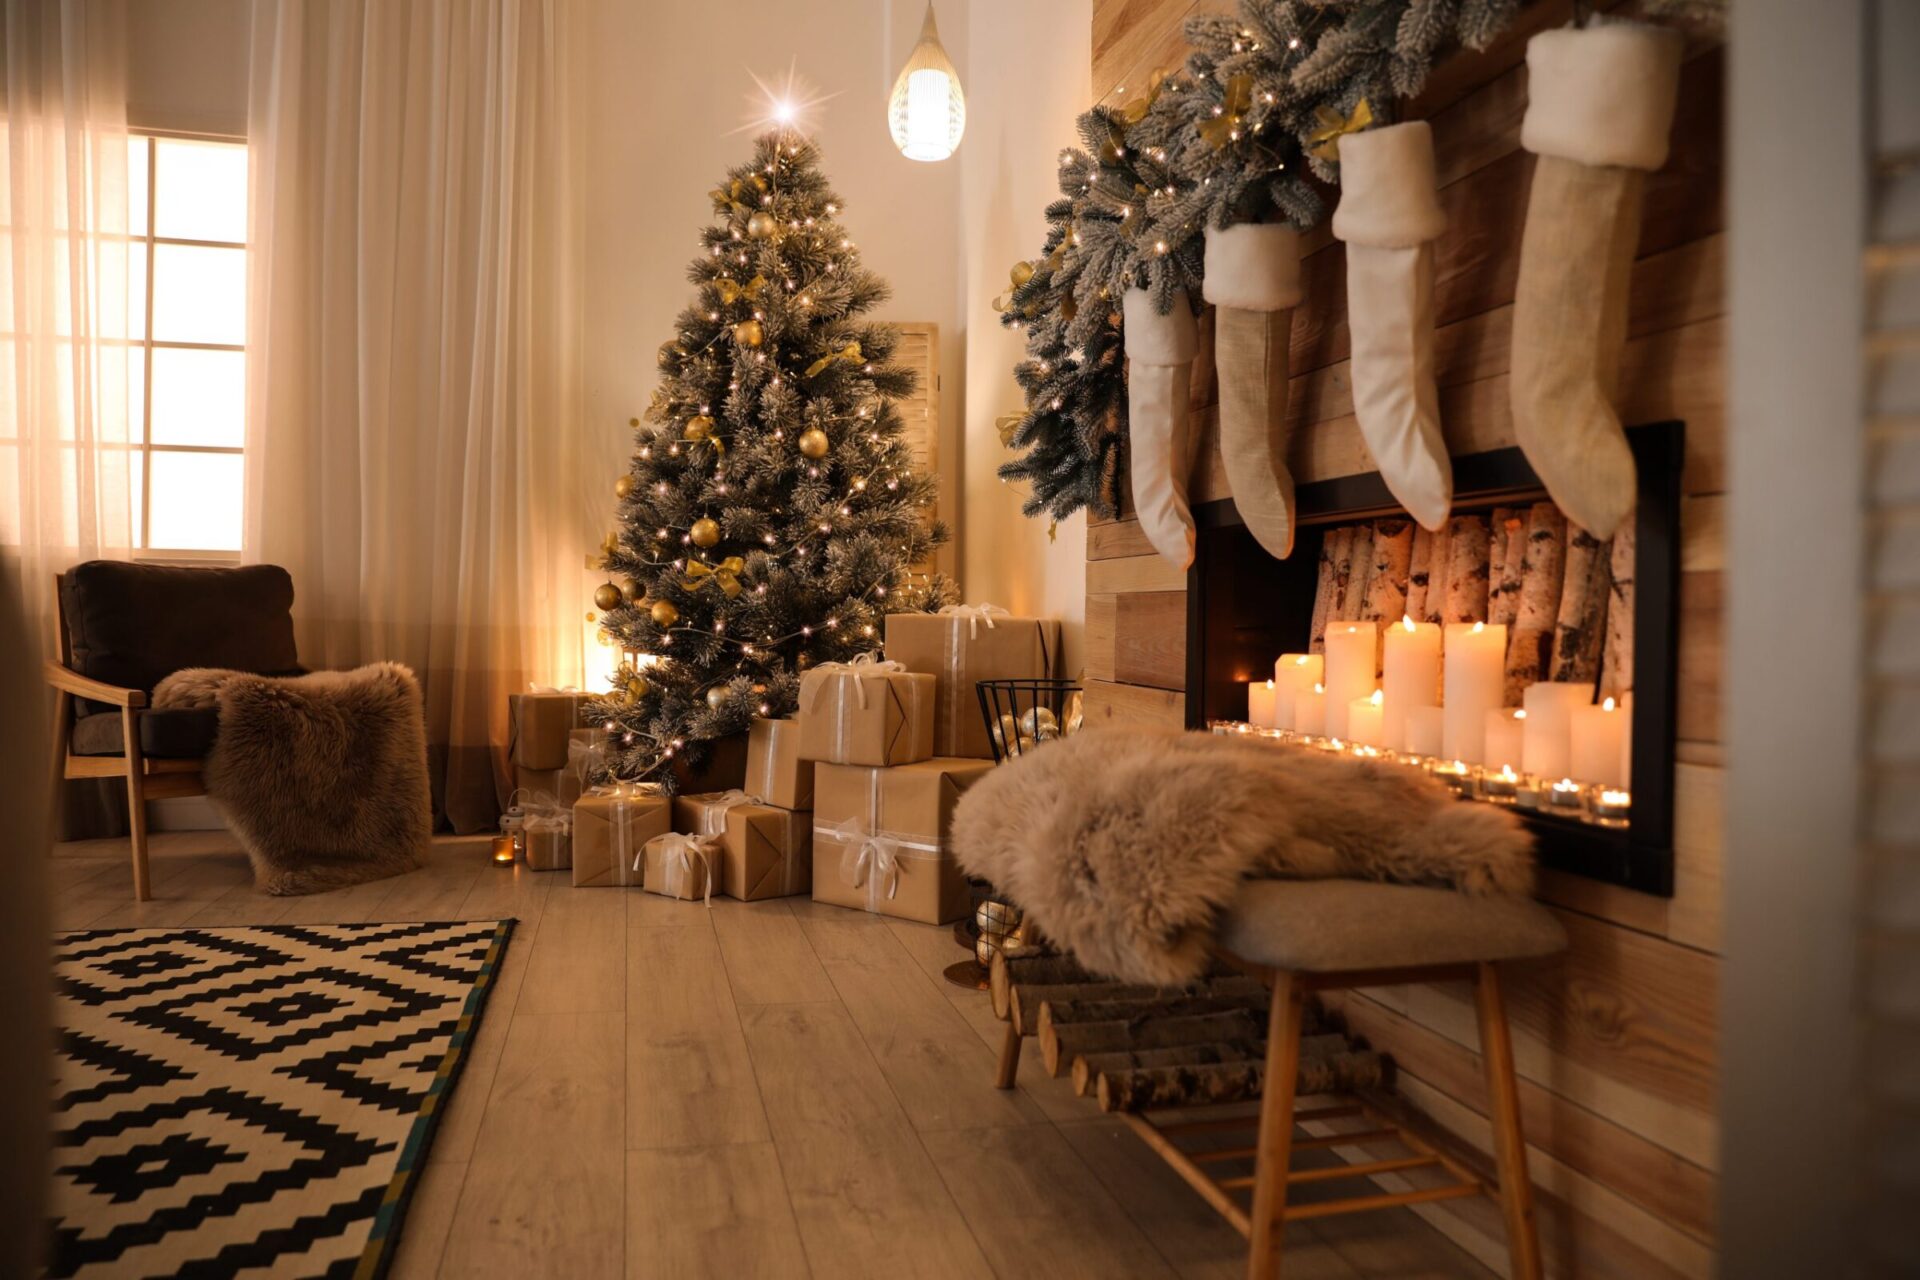 A cozy Christmas setting with a decorated tree, gifts, lit candles in a faux fireplace, stockings hanging, and warm lighting creating a festive atmosphere.